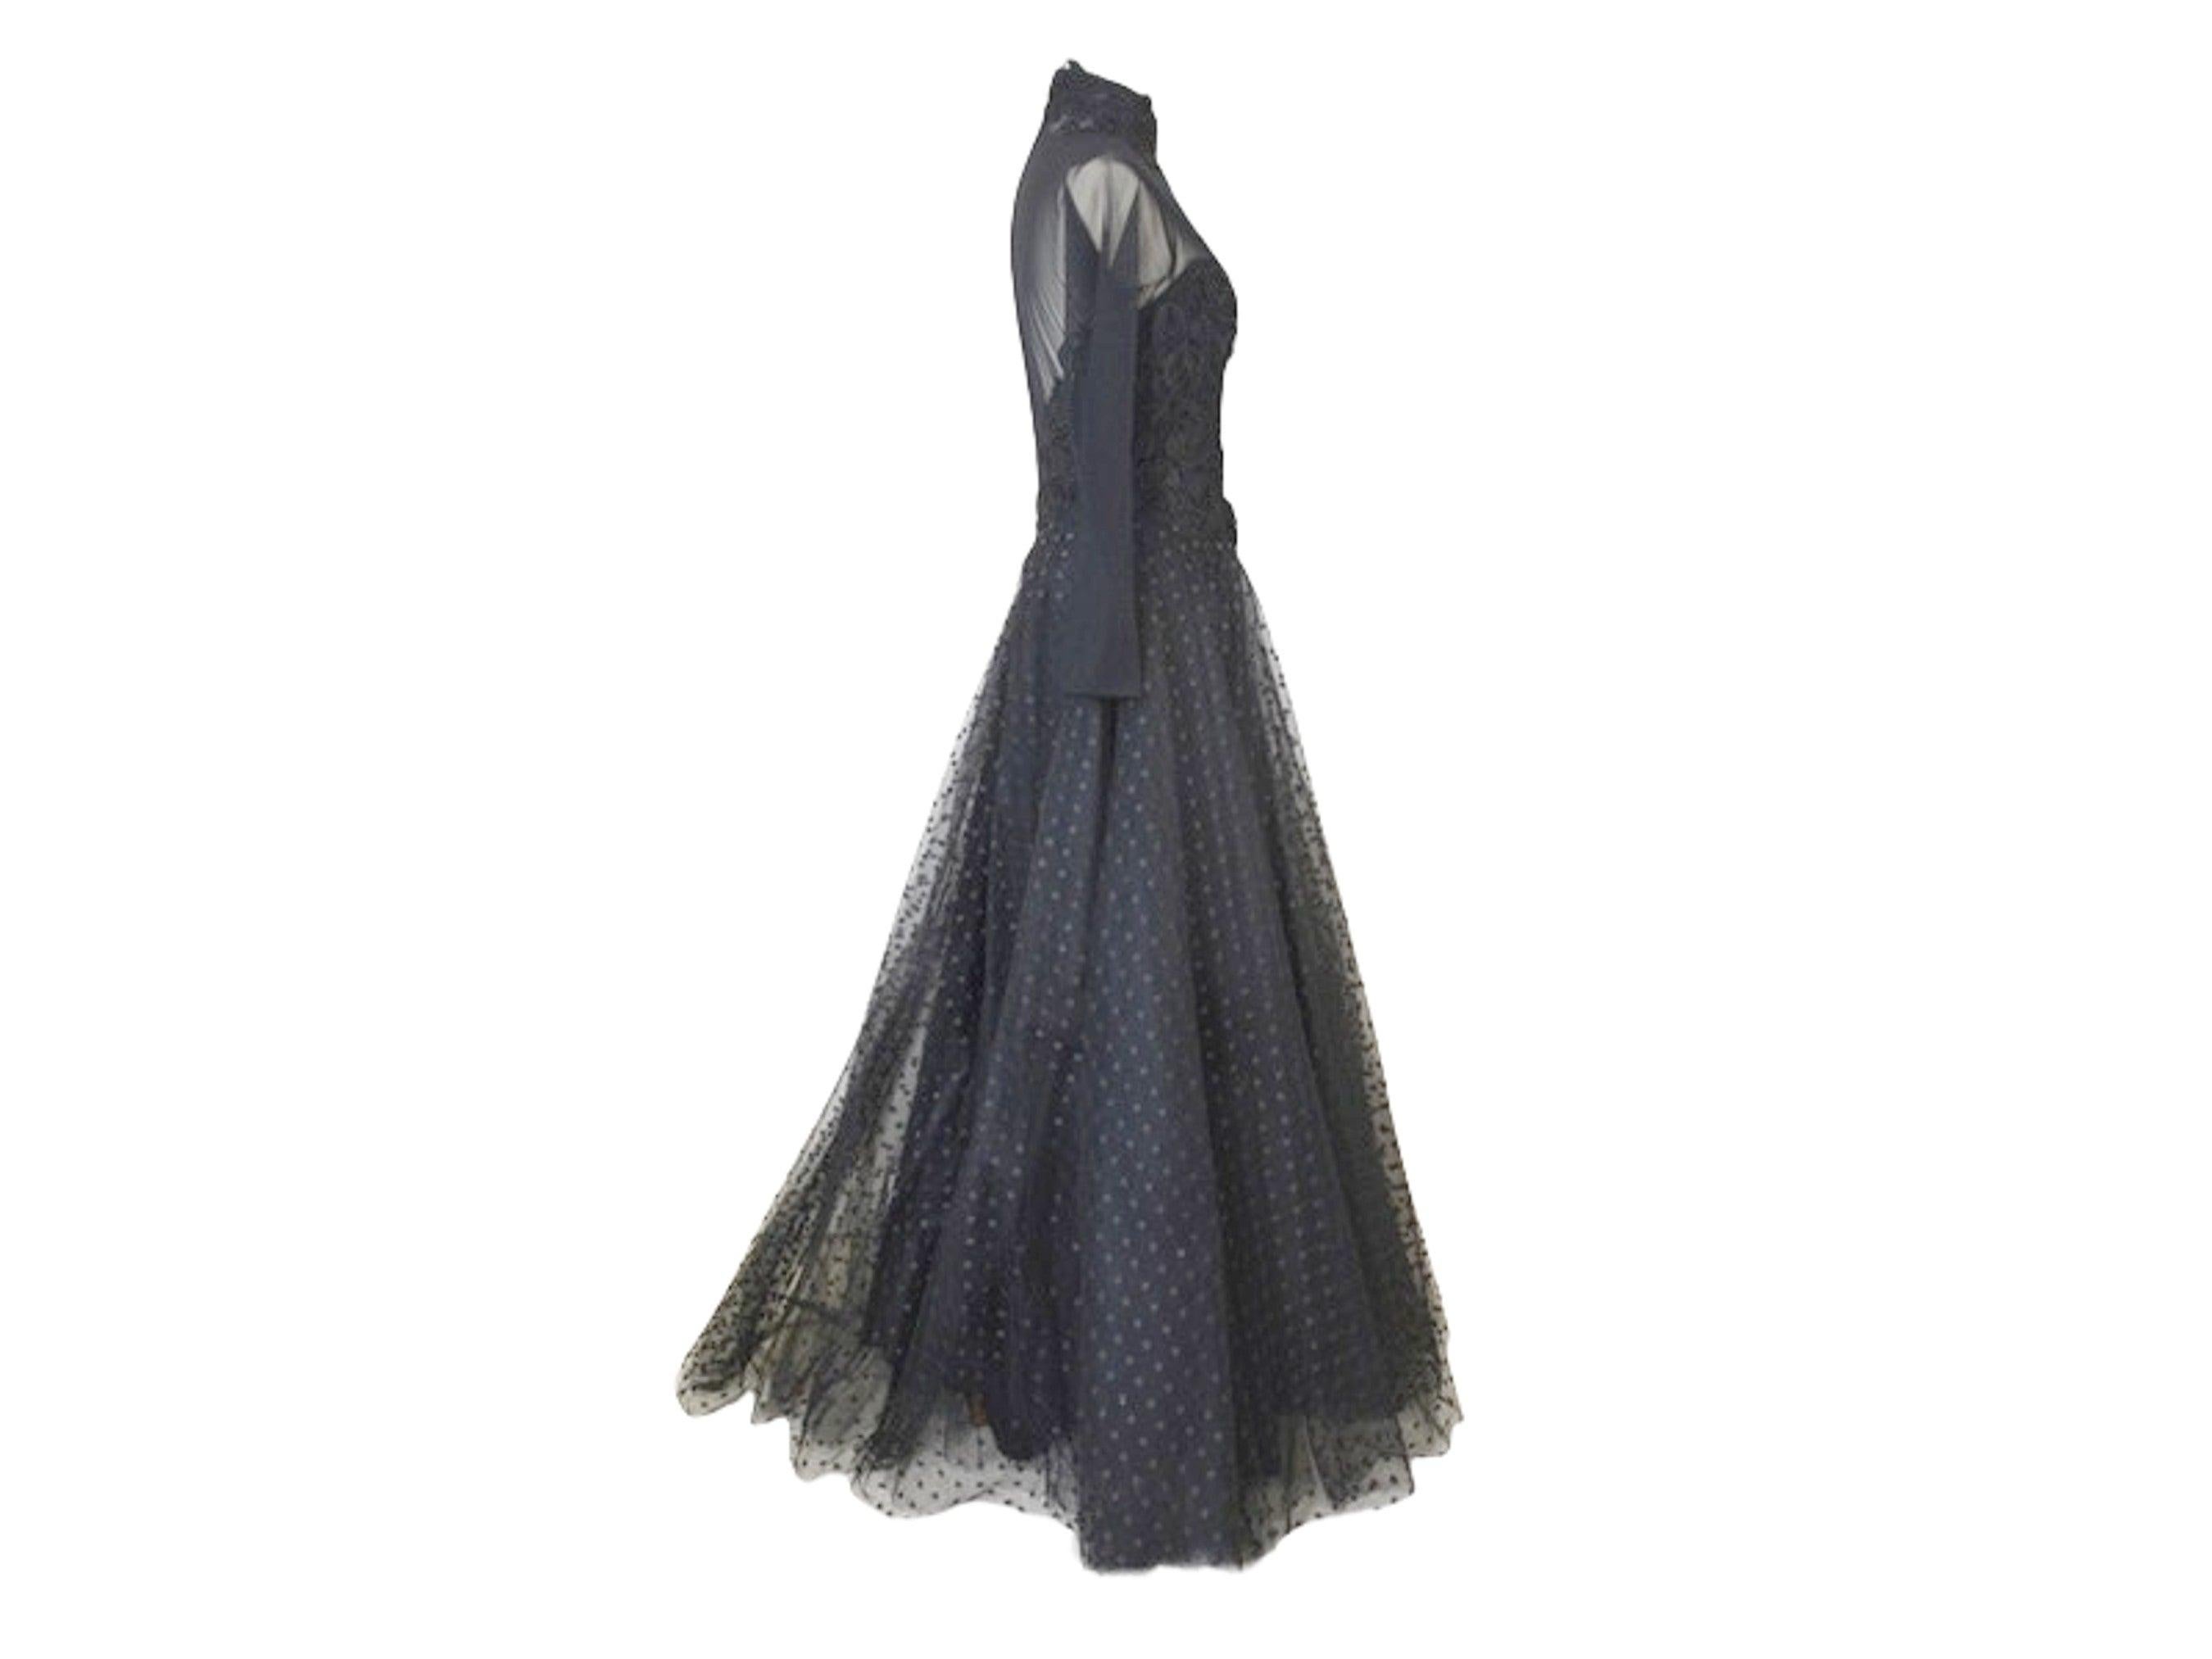 Lillie Rubin Sheer Black Polka Dot and Lace Soft Tulle Gothic Evening Gown SM In Good Condition For Sale In North Attleboro, MA